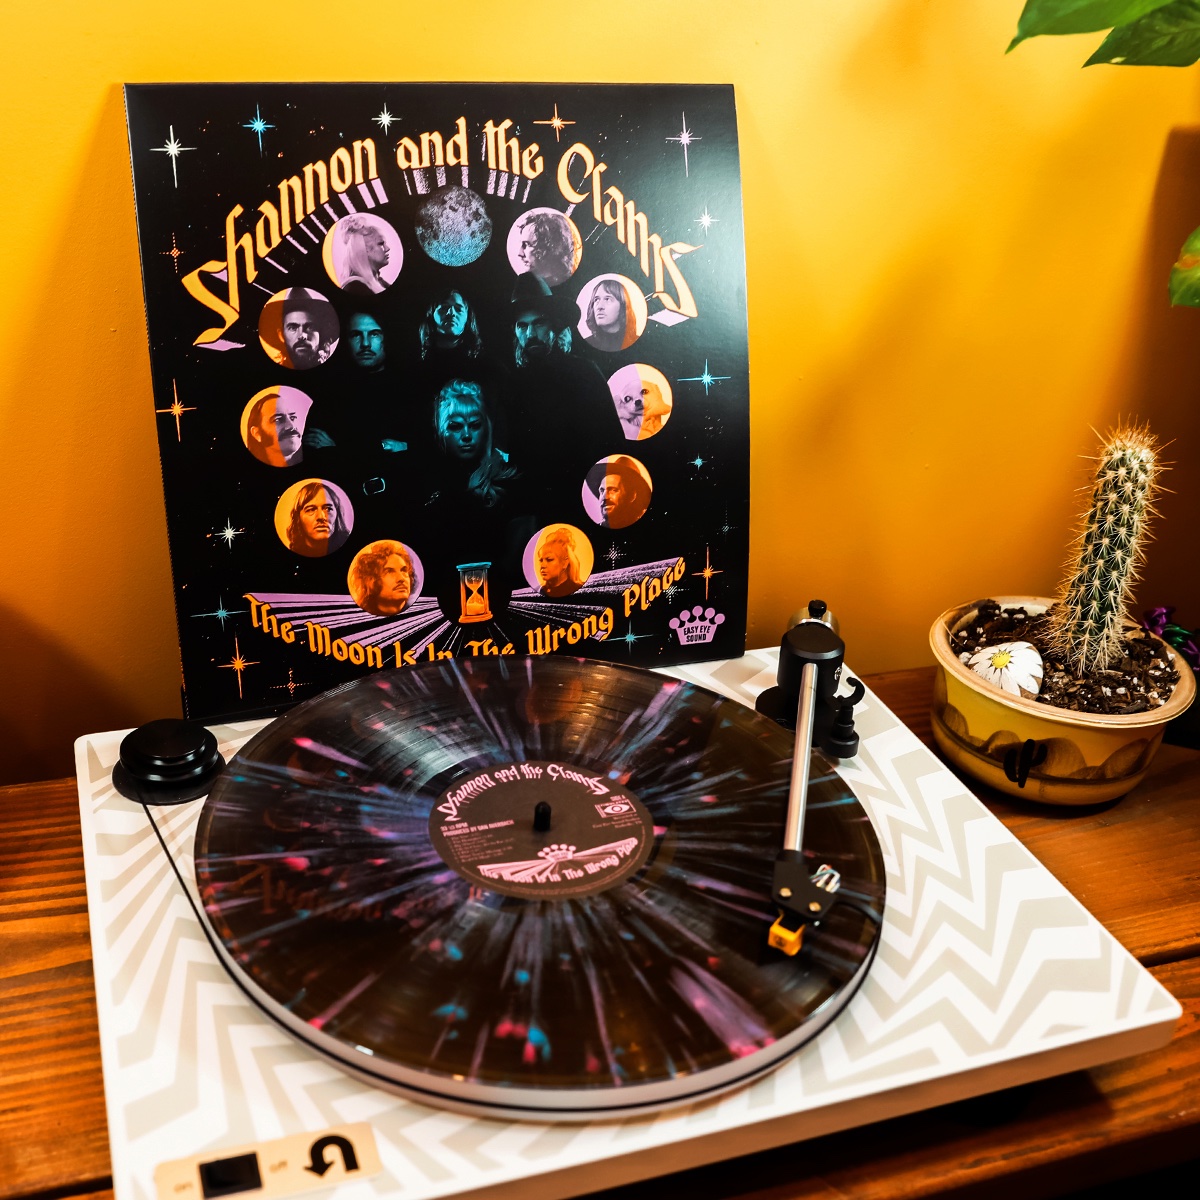 Today we have @shanandtheclams' latest LP on the turntable for a Sunday listen! This new album finds the band at their most introspective, their most ambitious work to date. This is the Levitation Edition pressing in “Deep Space Splatter” - just a few left in the shop!